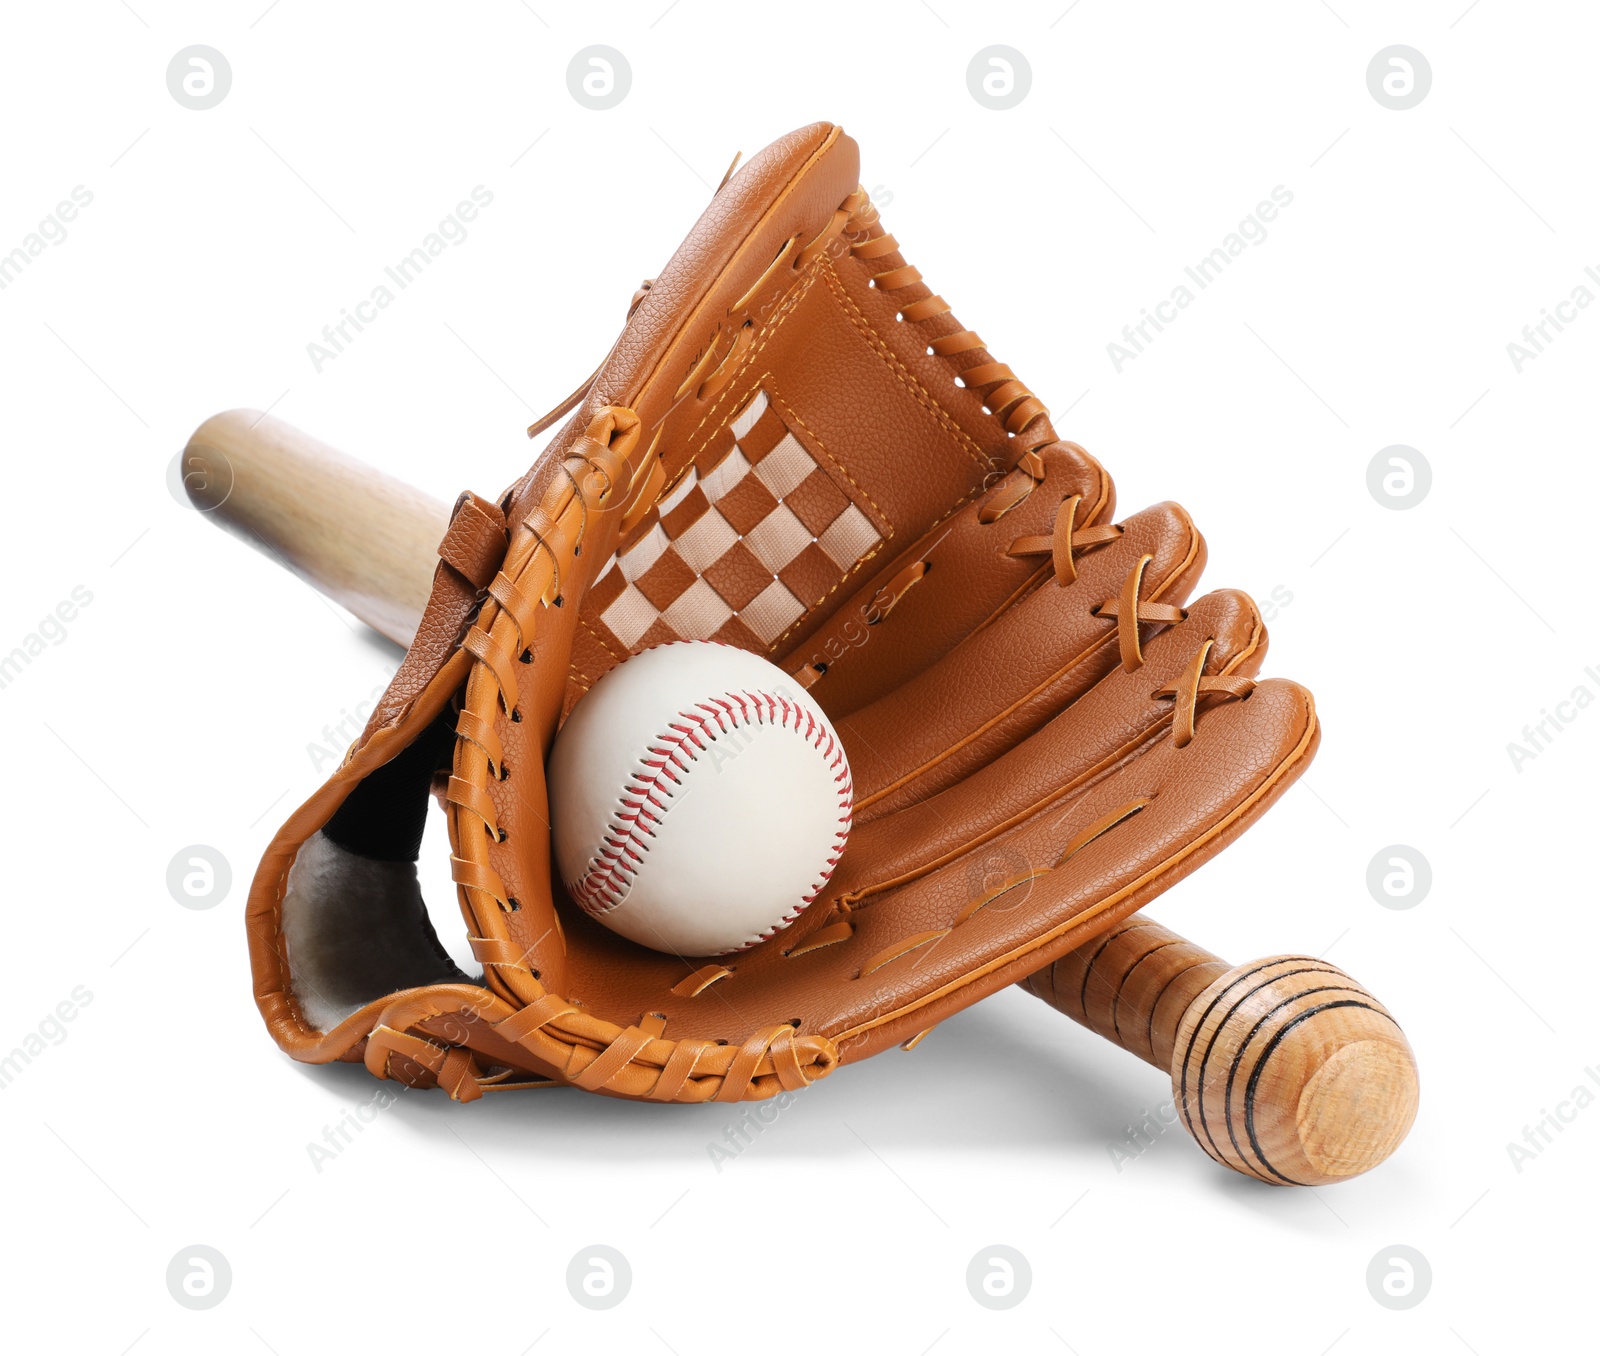 Photo of Wooden baseball bat, ball and glove isolated on white